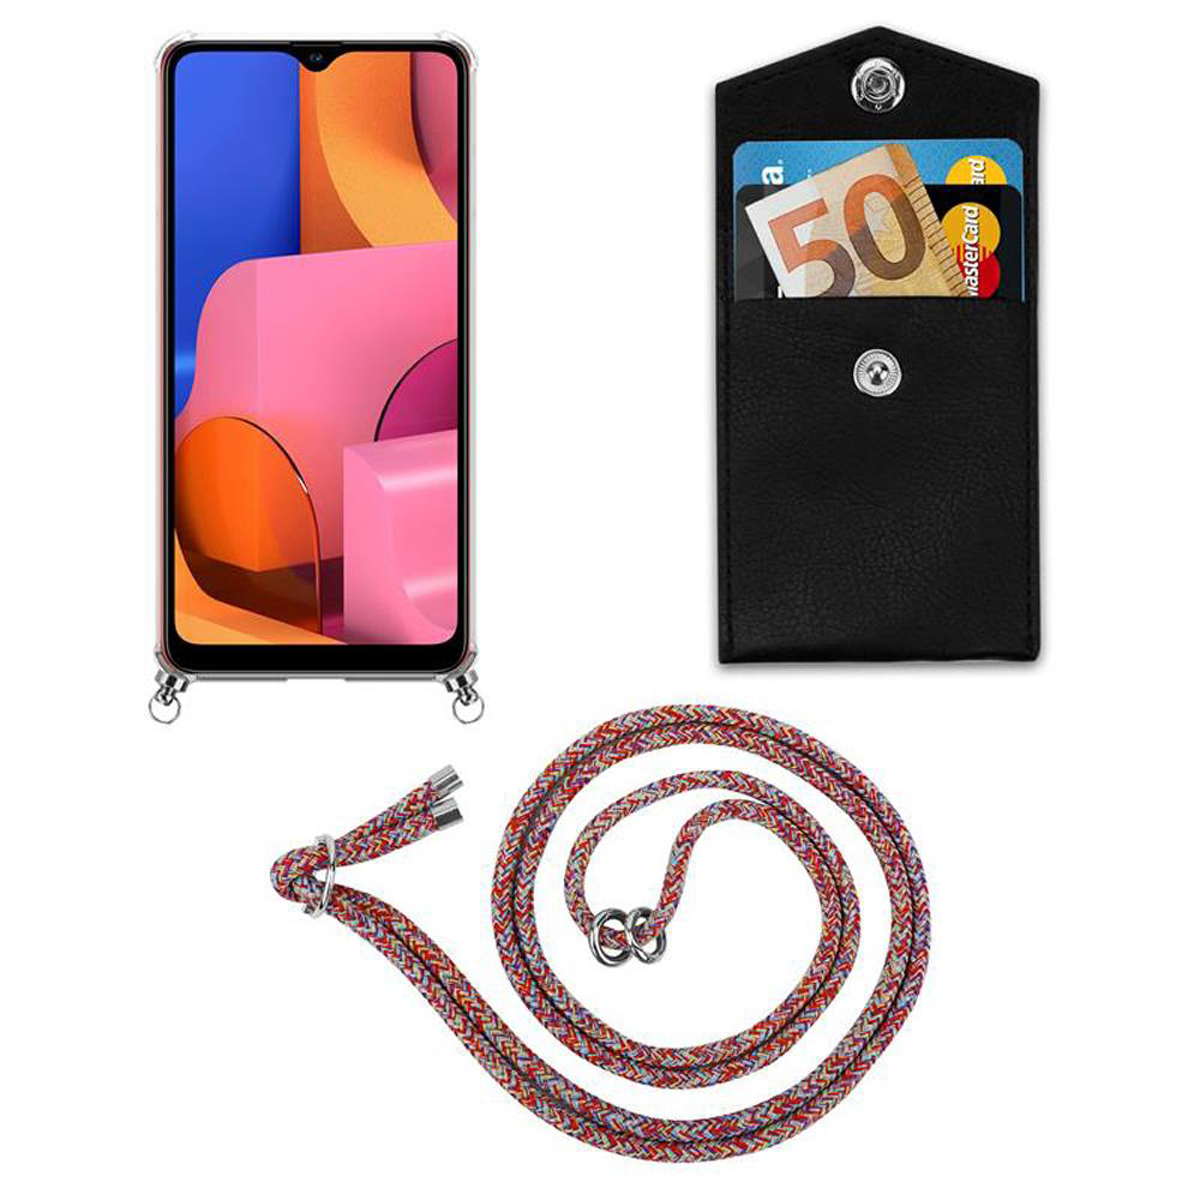 A21, CADORABO Band mit abnehmbarer Hülle, Handy Backcover, Samsung, Ringen, PARROT Kette Kordel COLORFUL und Silber Galaxy